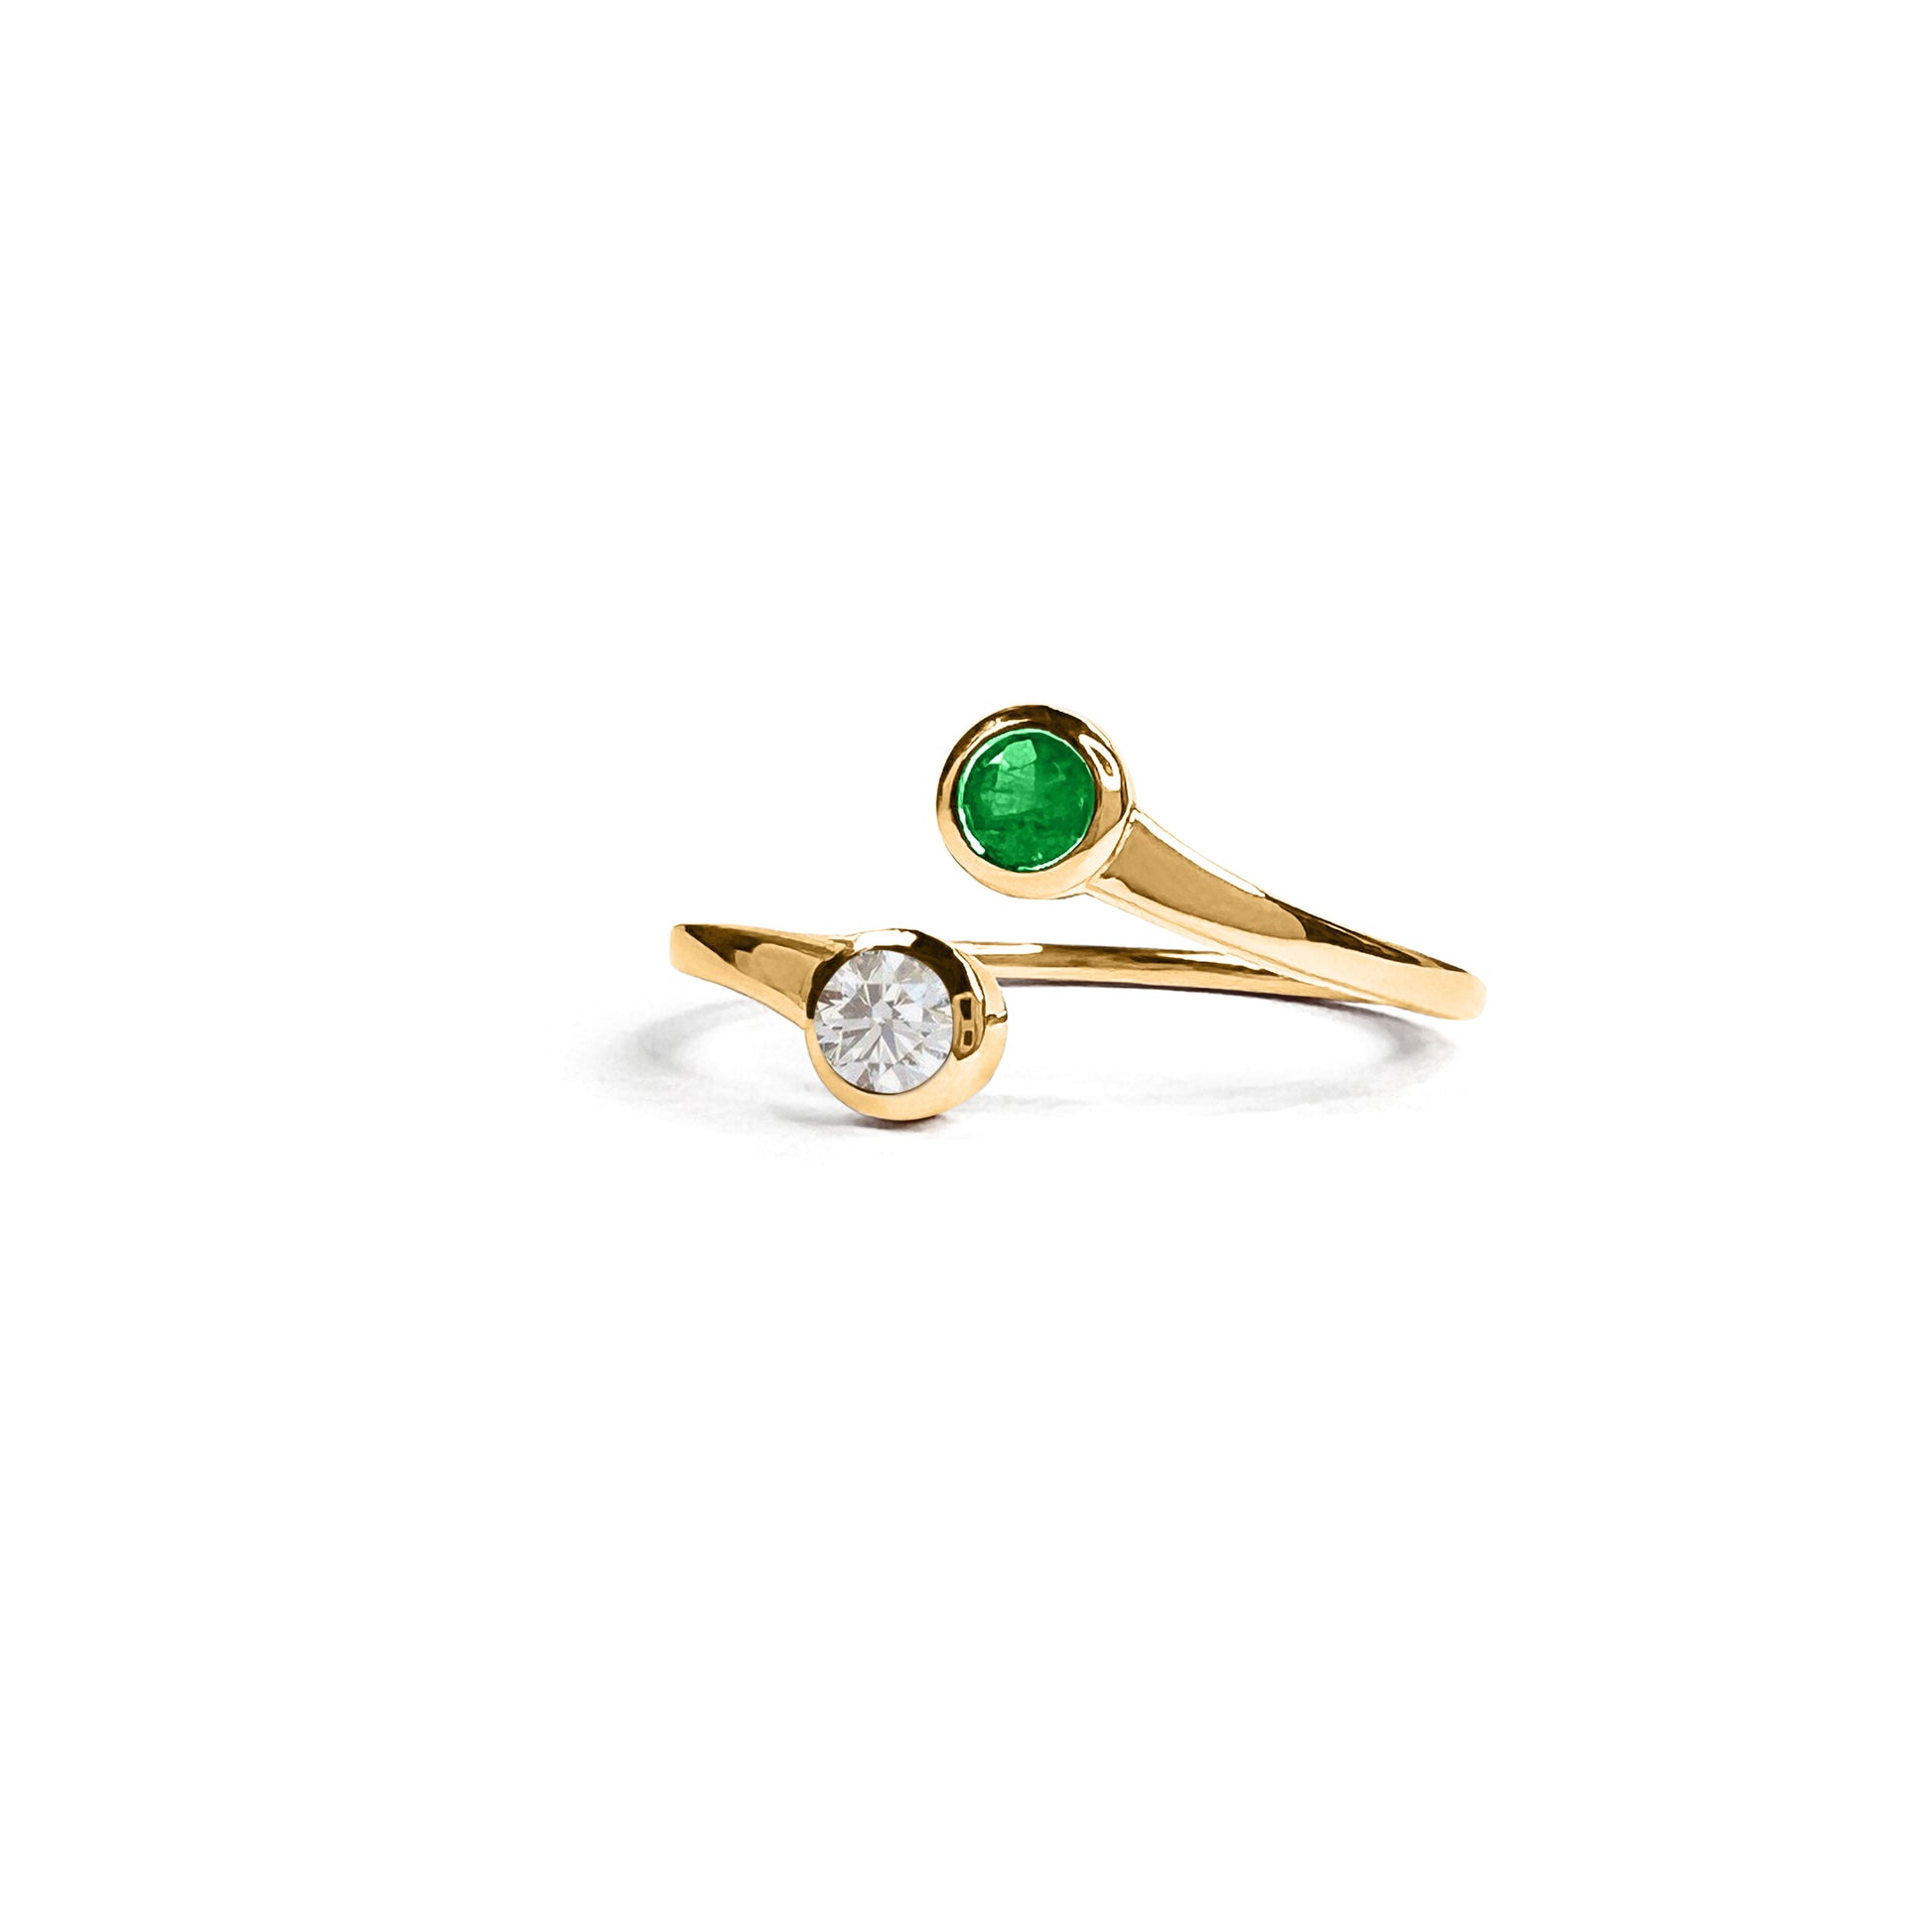 Details.  Indulge in the exquisite beauty of this 14K Double Emerald and Diamond Ring. With its elegant design, stunning emerald stones, and sparkling diamond accents, this ring is sure to turn heads and make a statement.  2mm Band that tapers down to the bottom 1.5mm  4mm Diamond   4mm Emerald